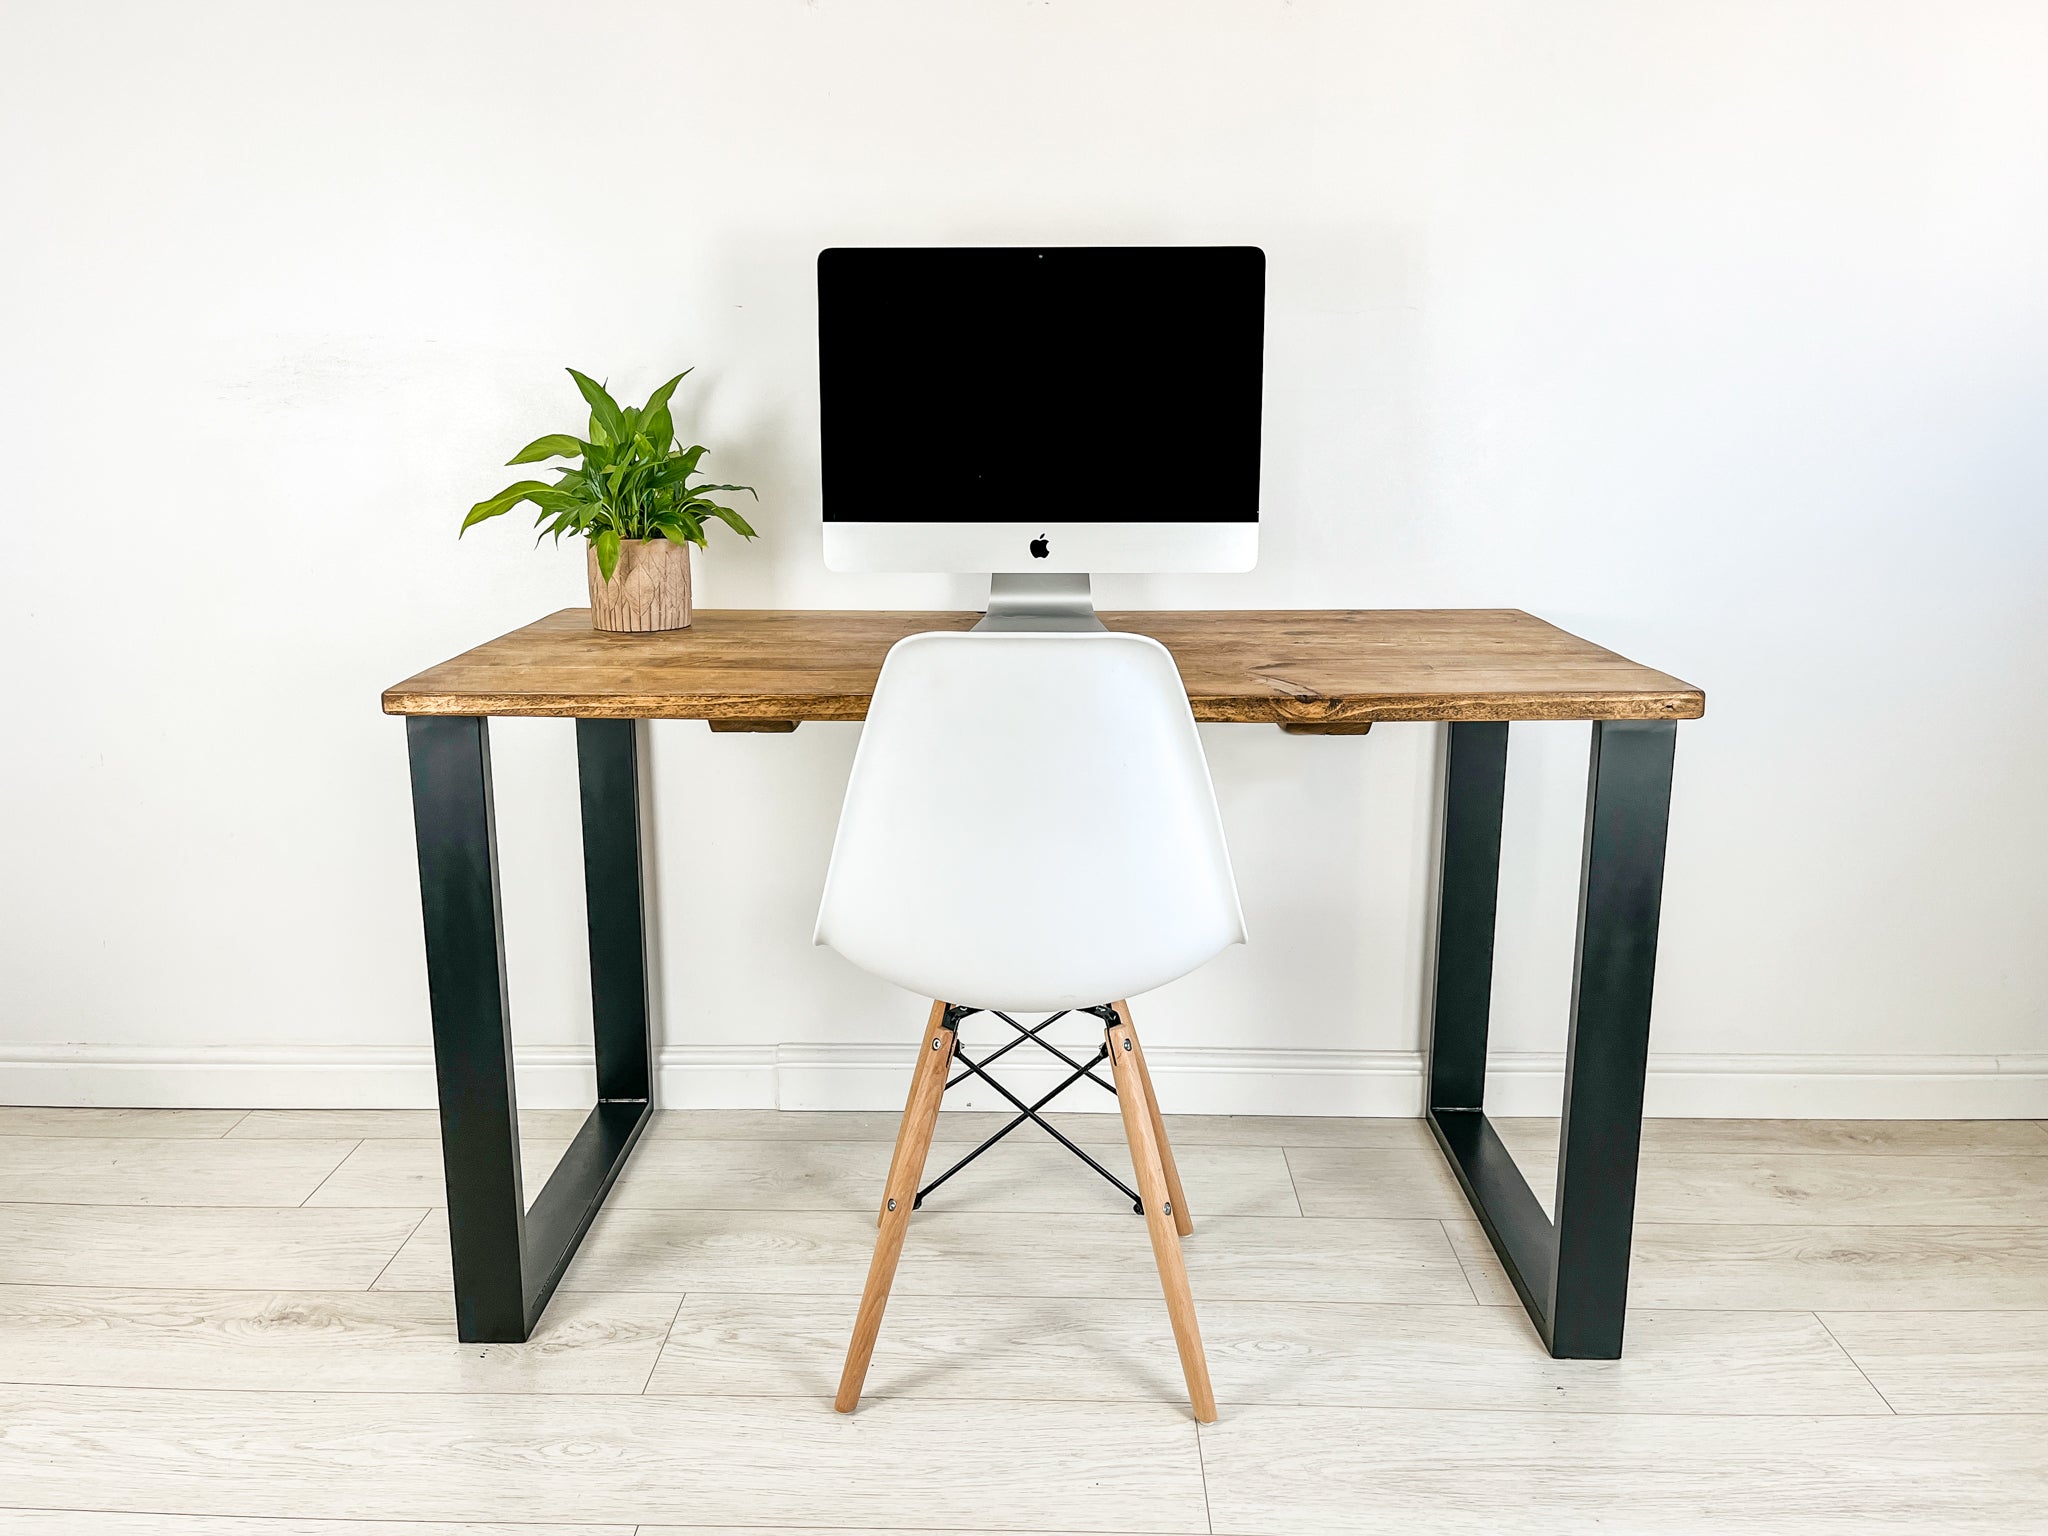 Rustic Wood Desk with Steel Square Frame Legs